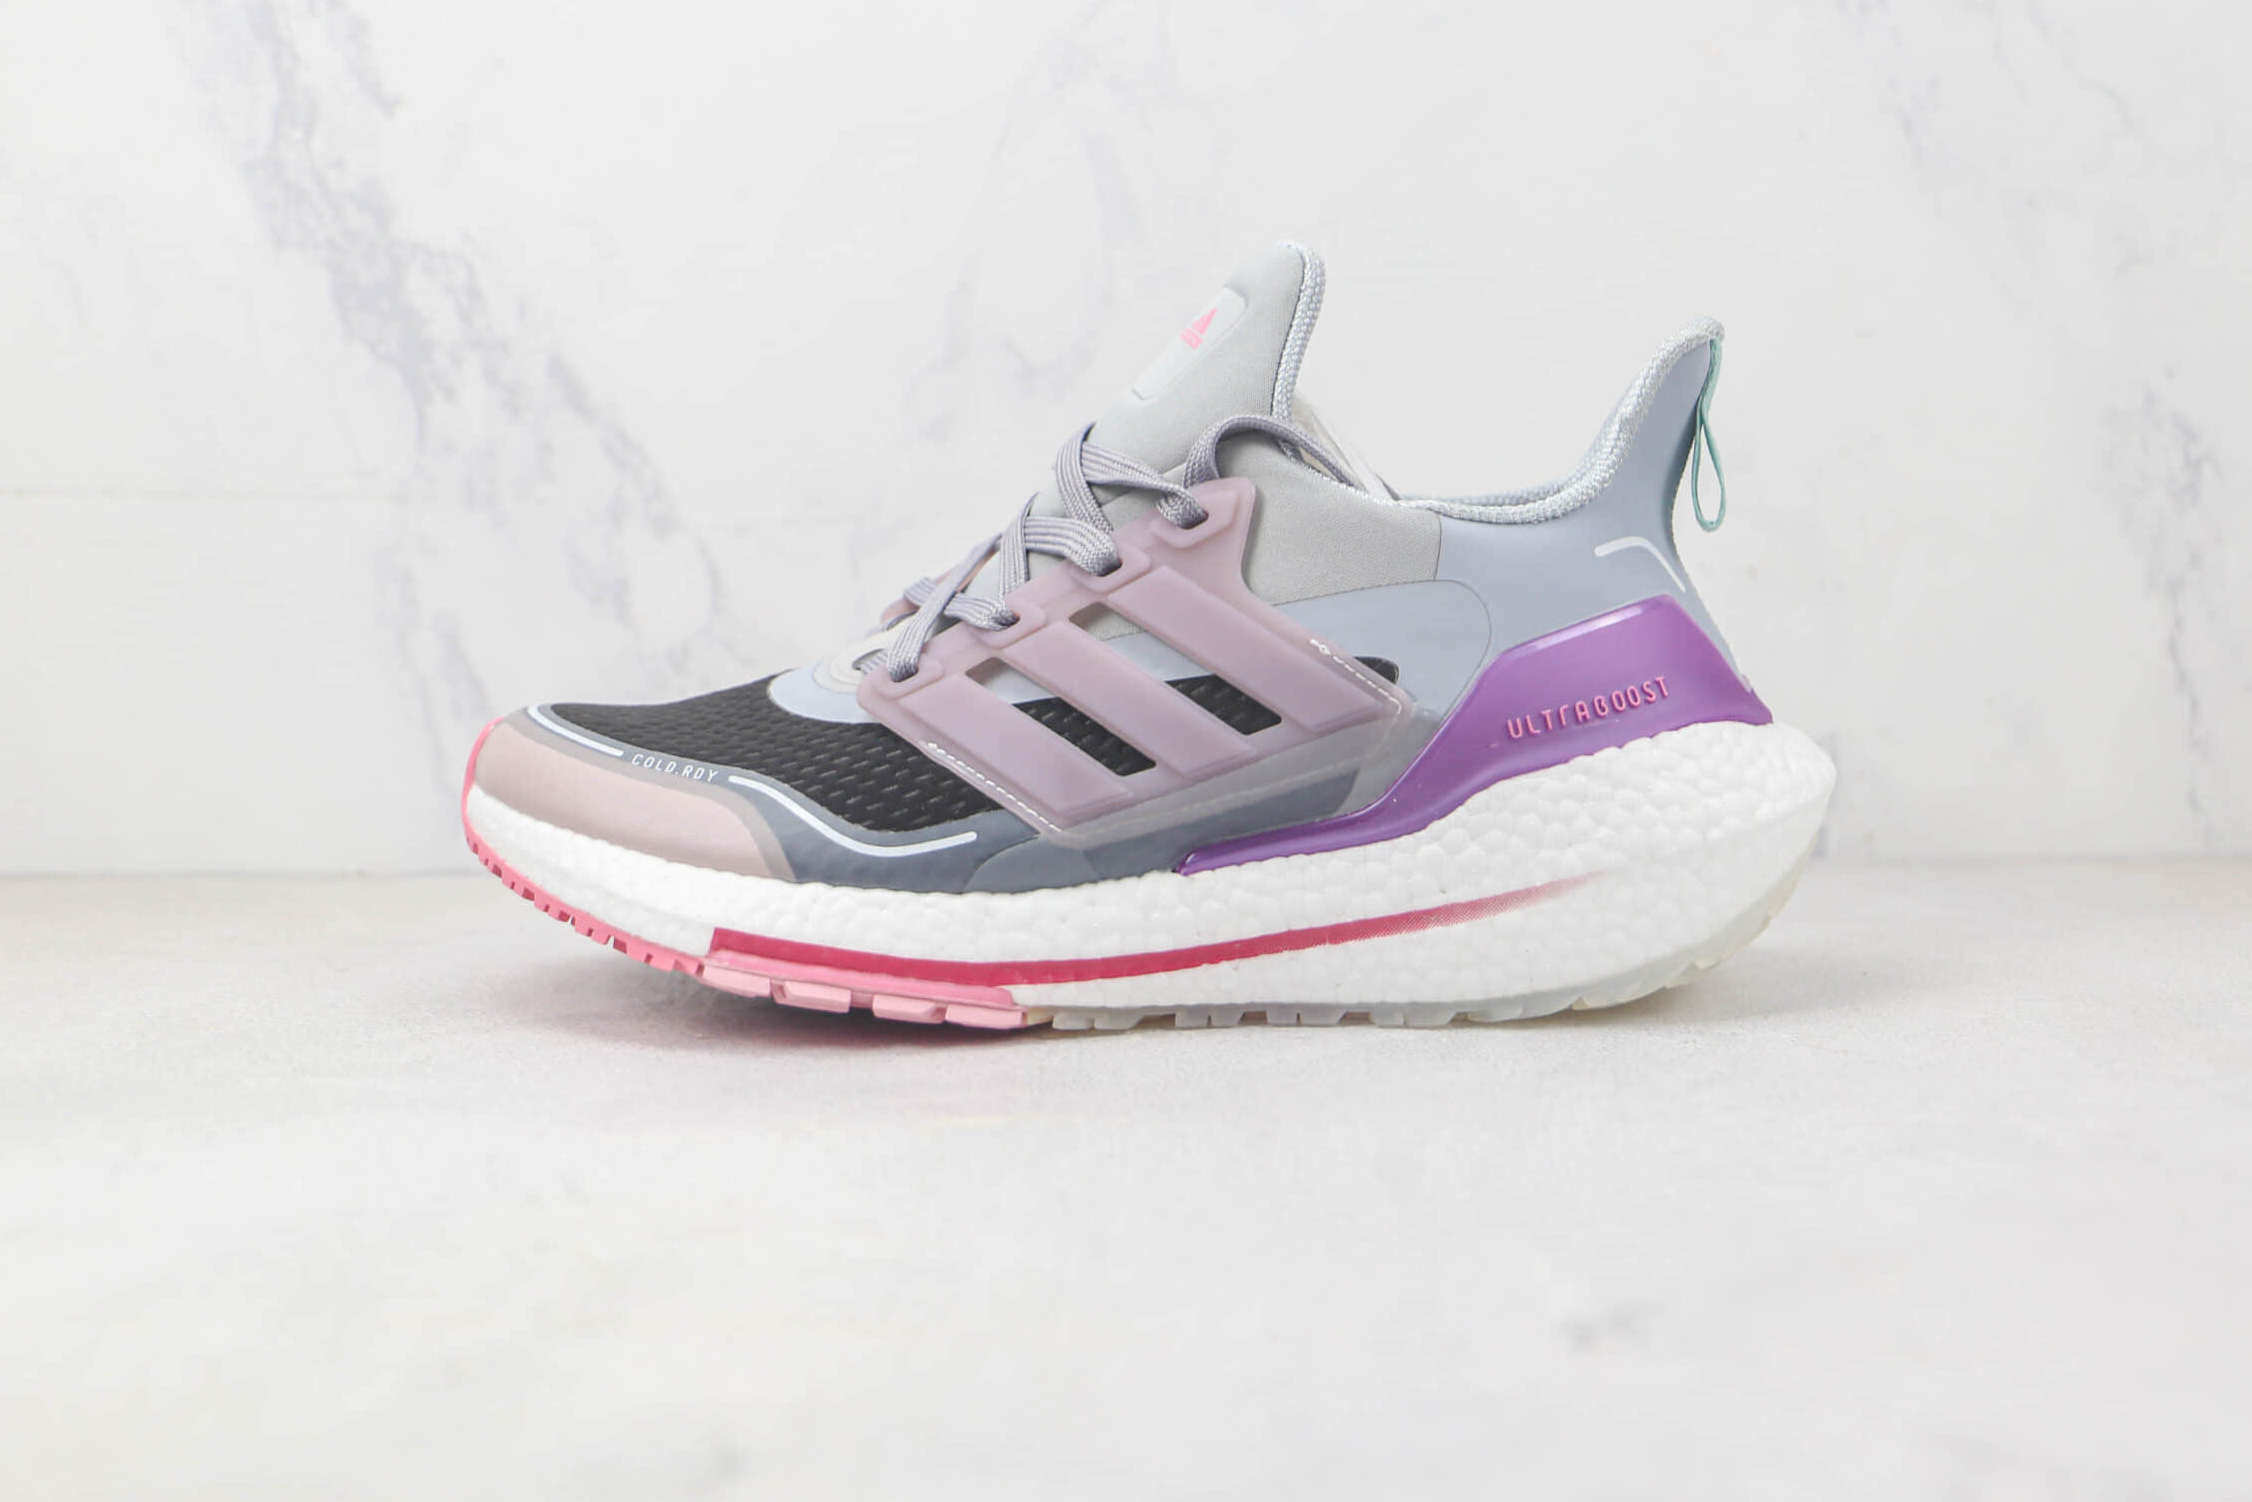 Adidas Ultra Boost 21 Cold.Rdy 'Halo Silver Ice Purple' S23908 - Stylish and Performance-Driven Footwear